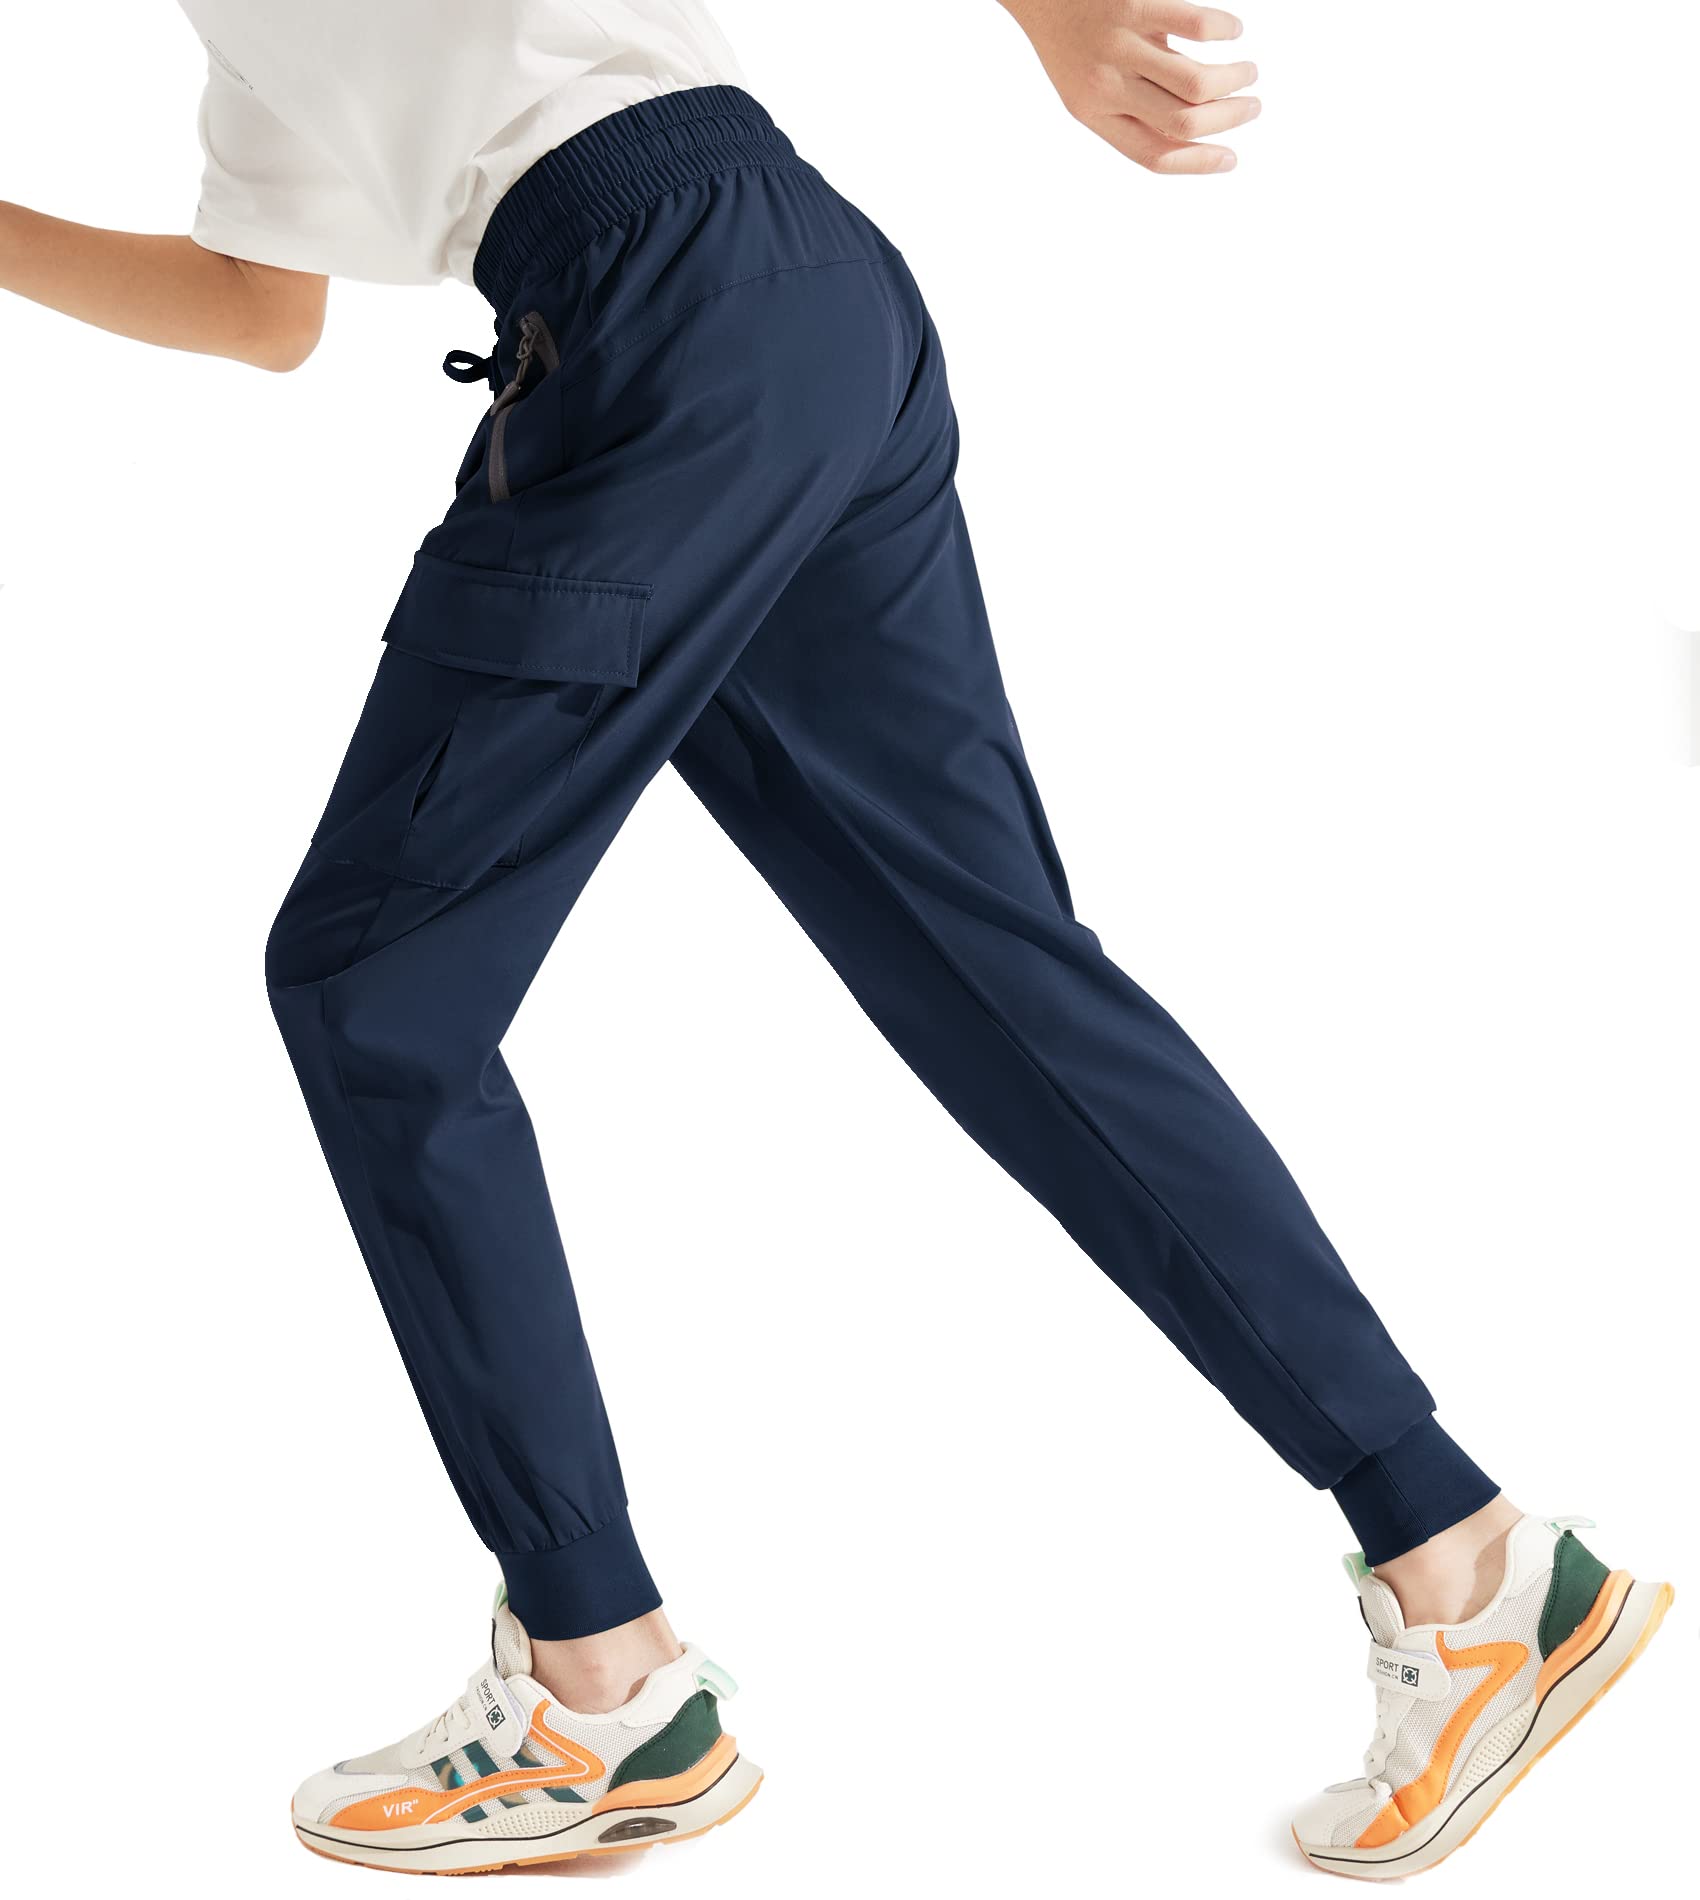 Libin Boy's Youth Cargo Joggers Pants Quick Dry Hiking Active Pull